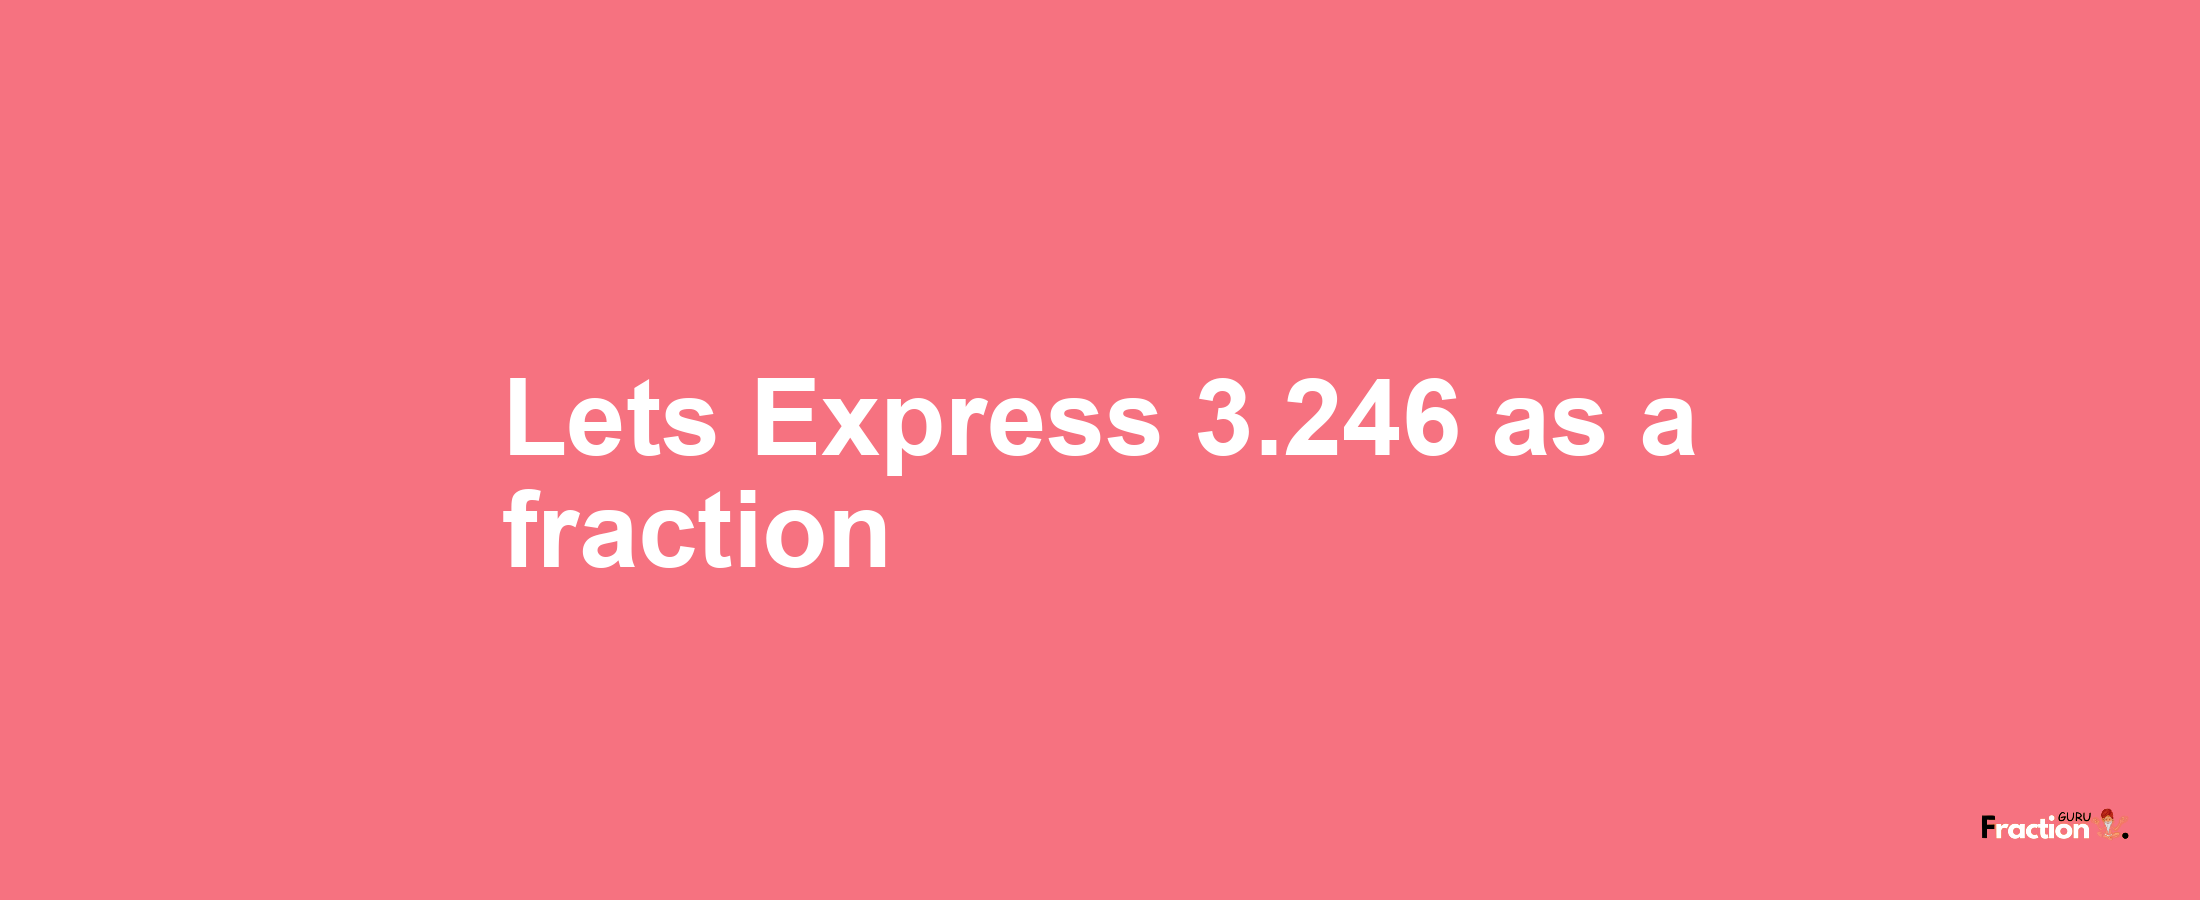 Lets Express 3.246 as afraction